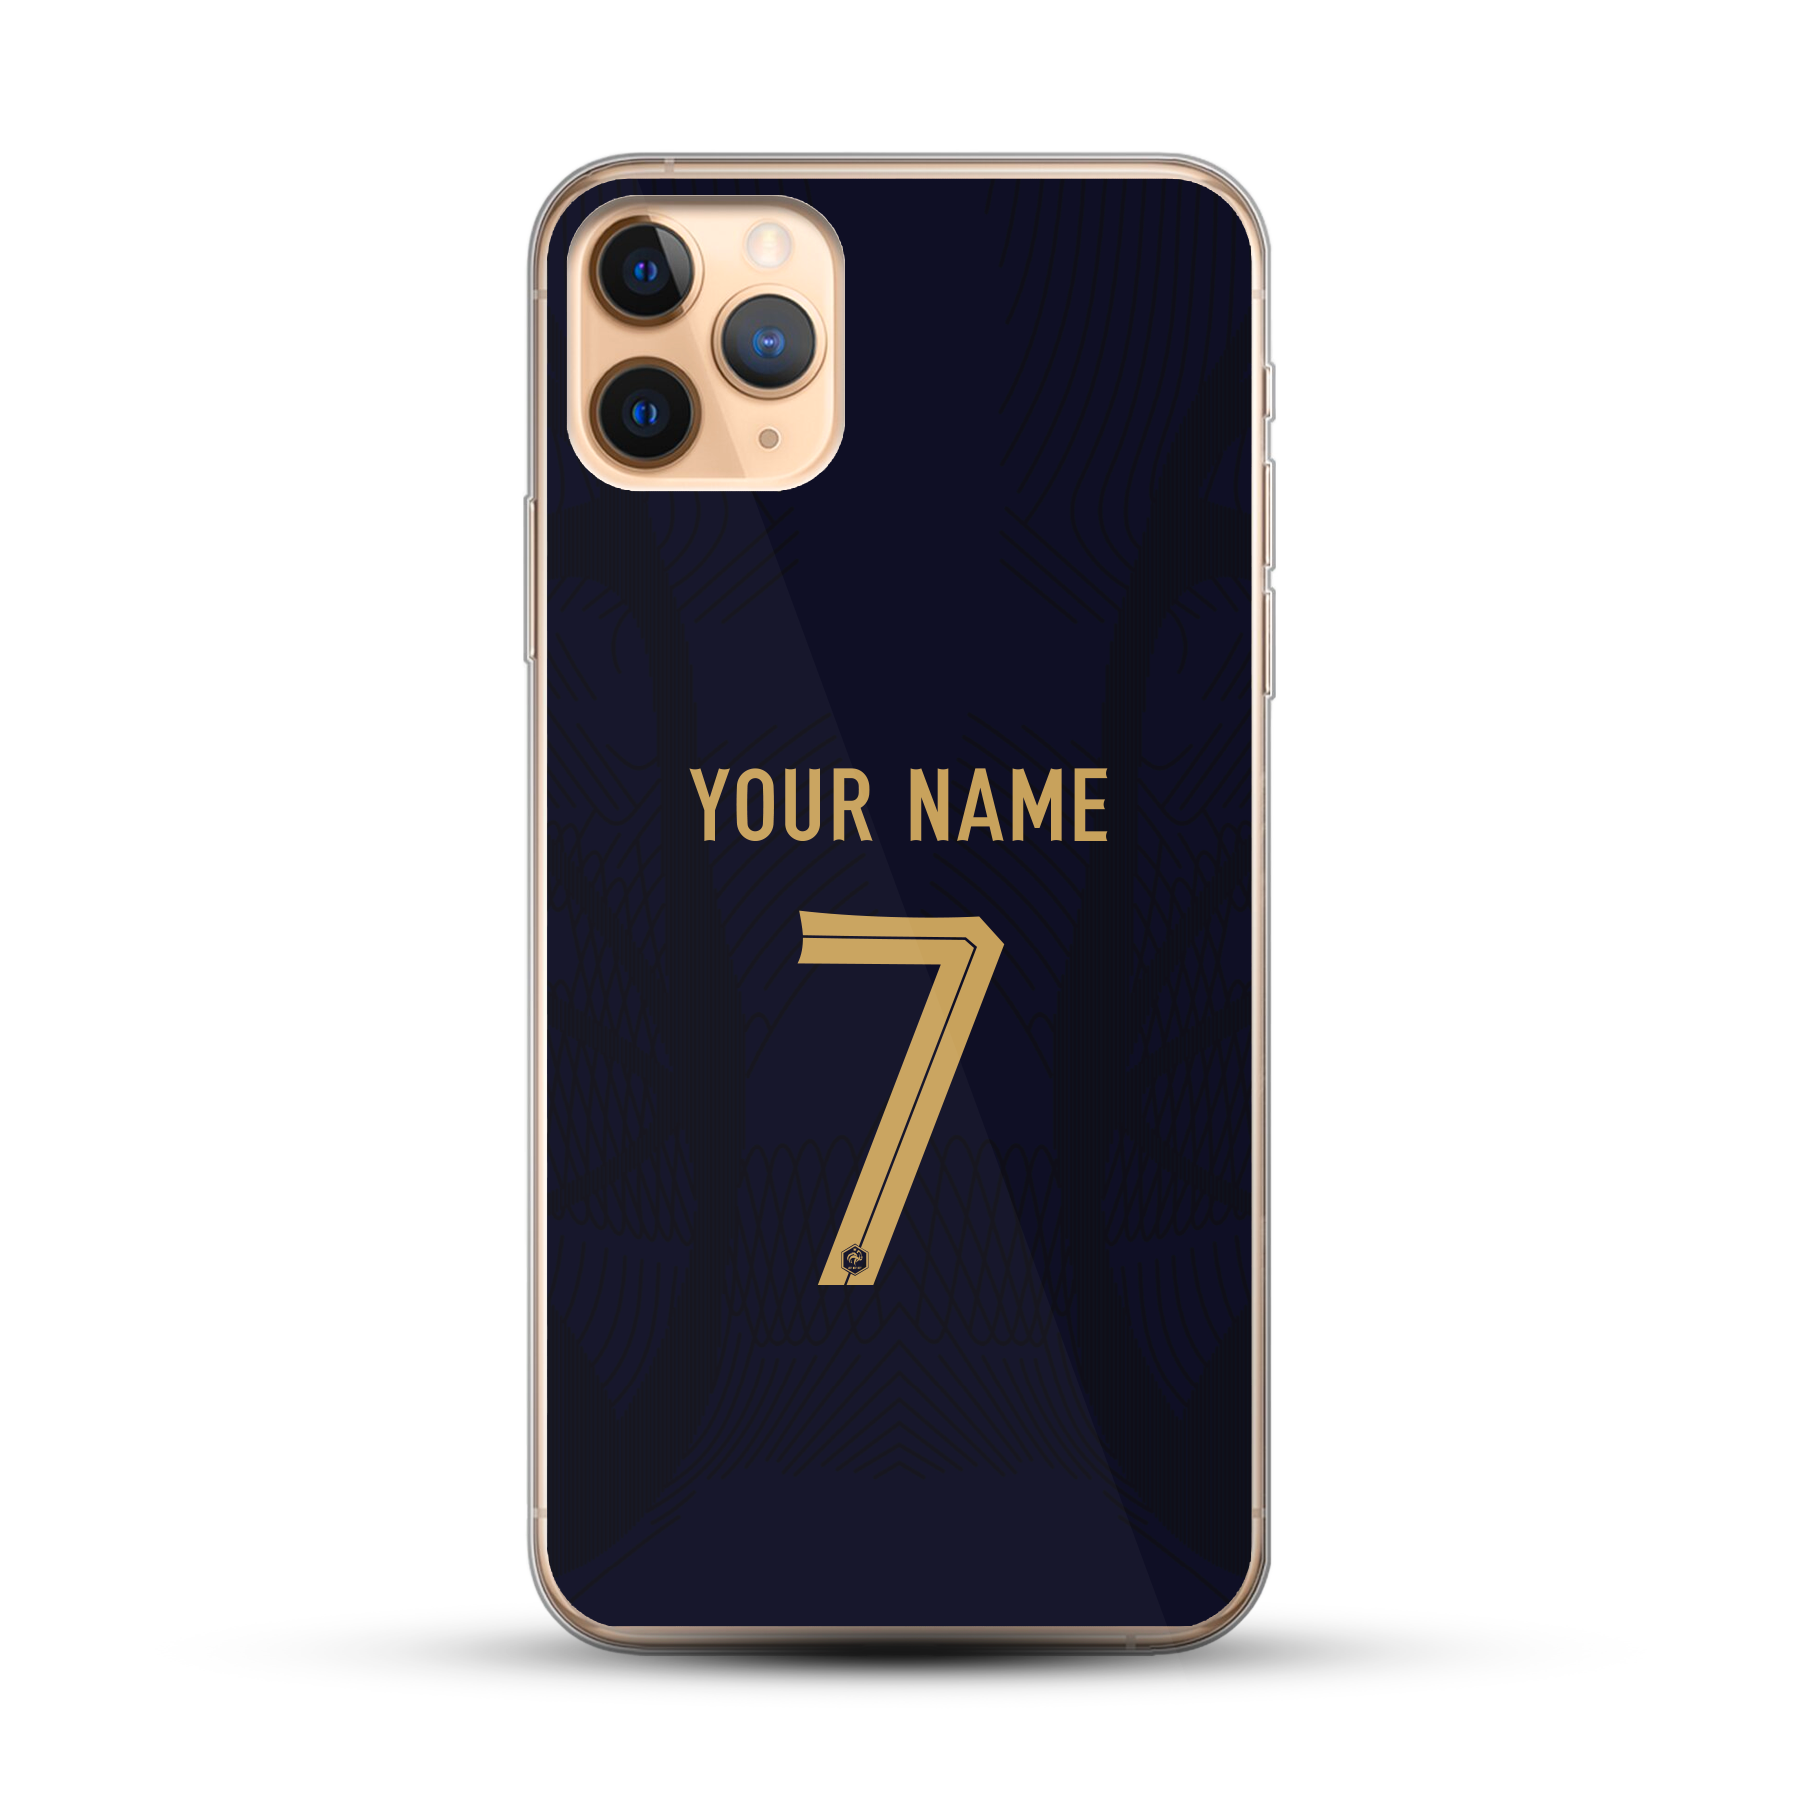 France 2022 (World Cup) - Home Kit Phone Case